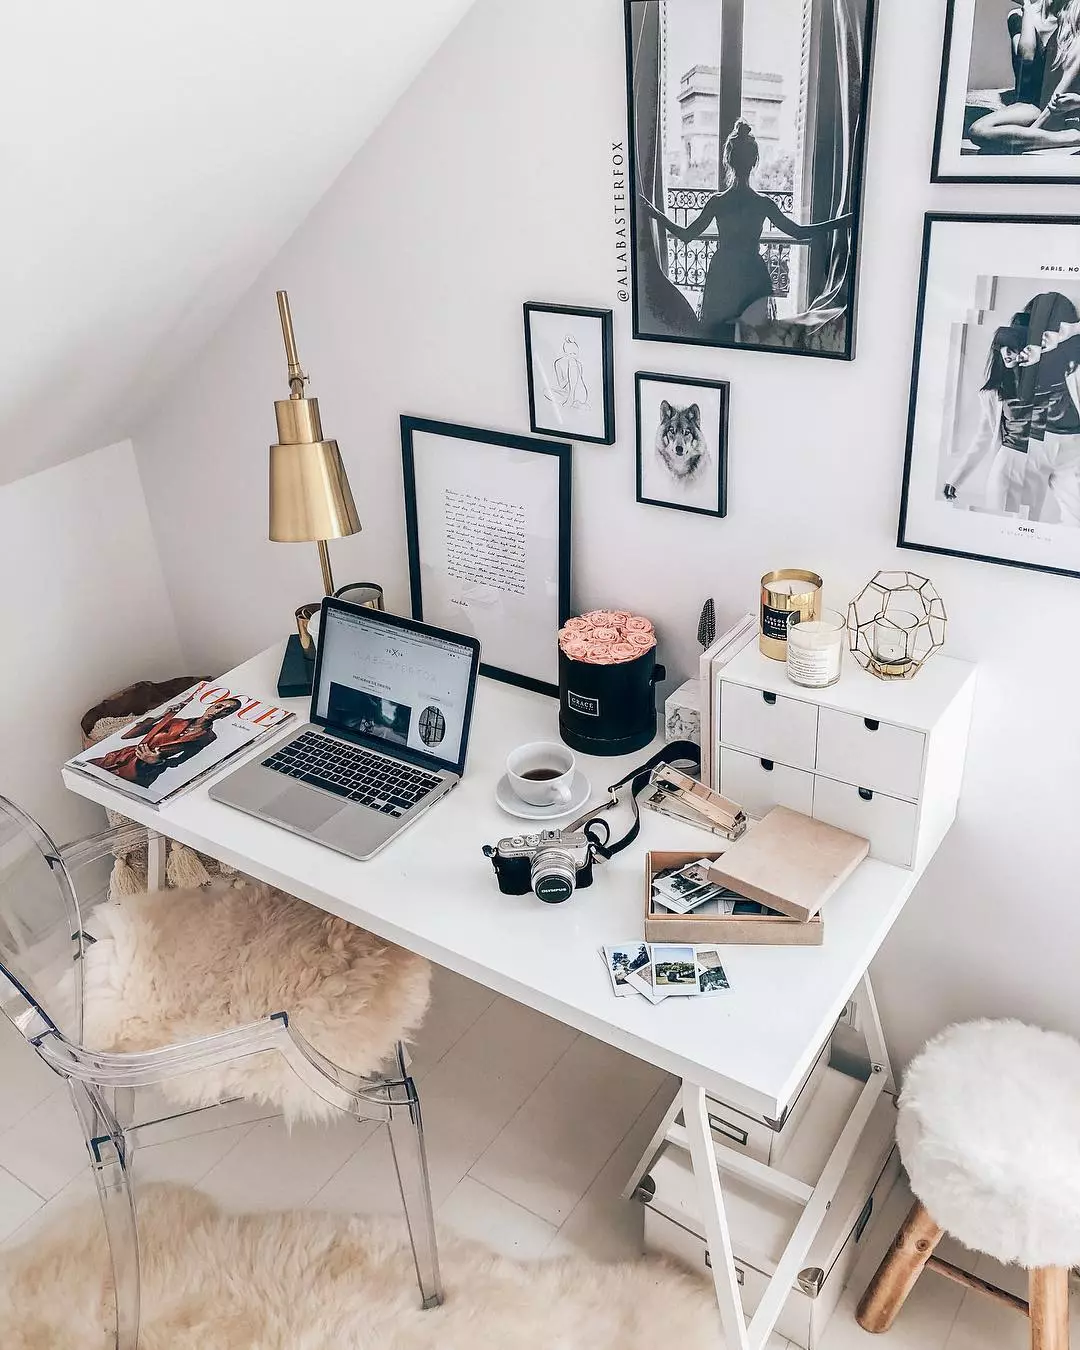 Setting Up a Home Office? You'll Need 21 Work from Home Accessories